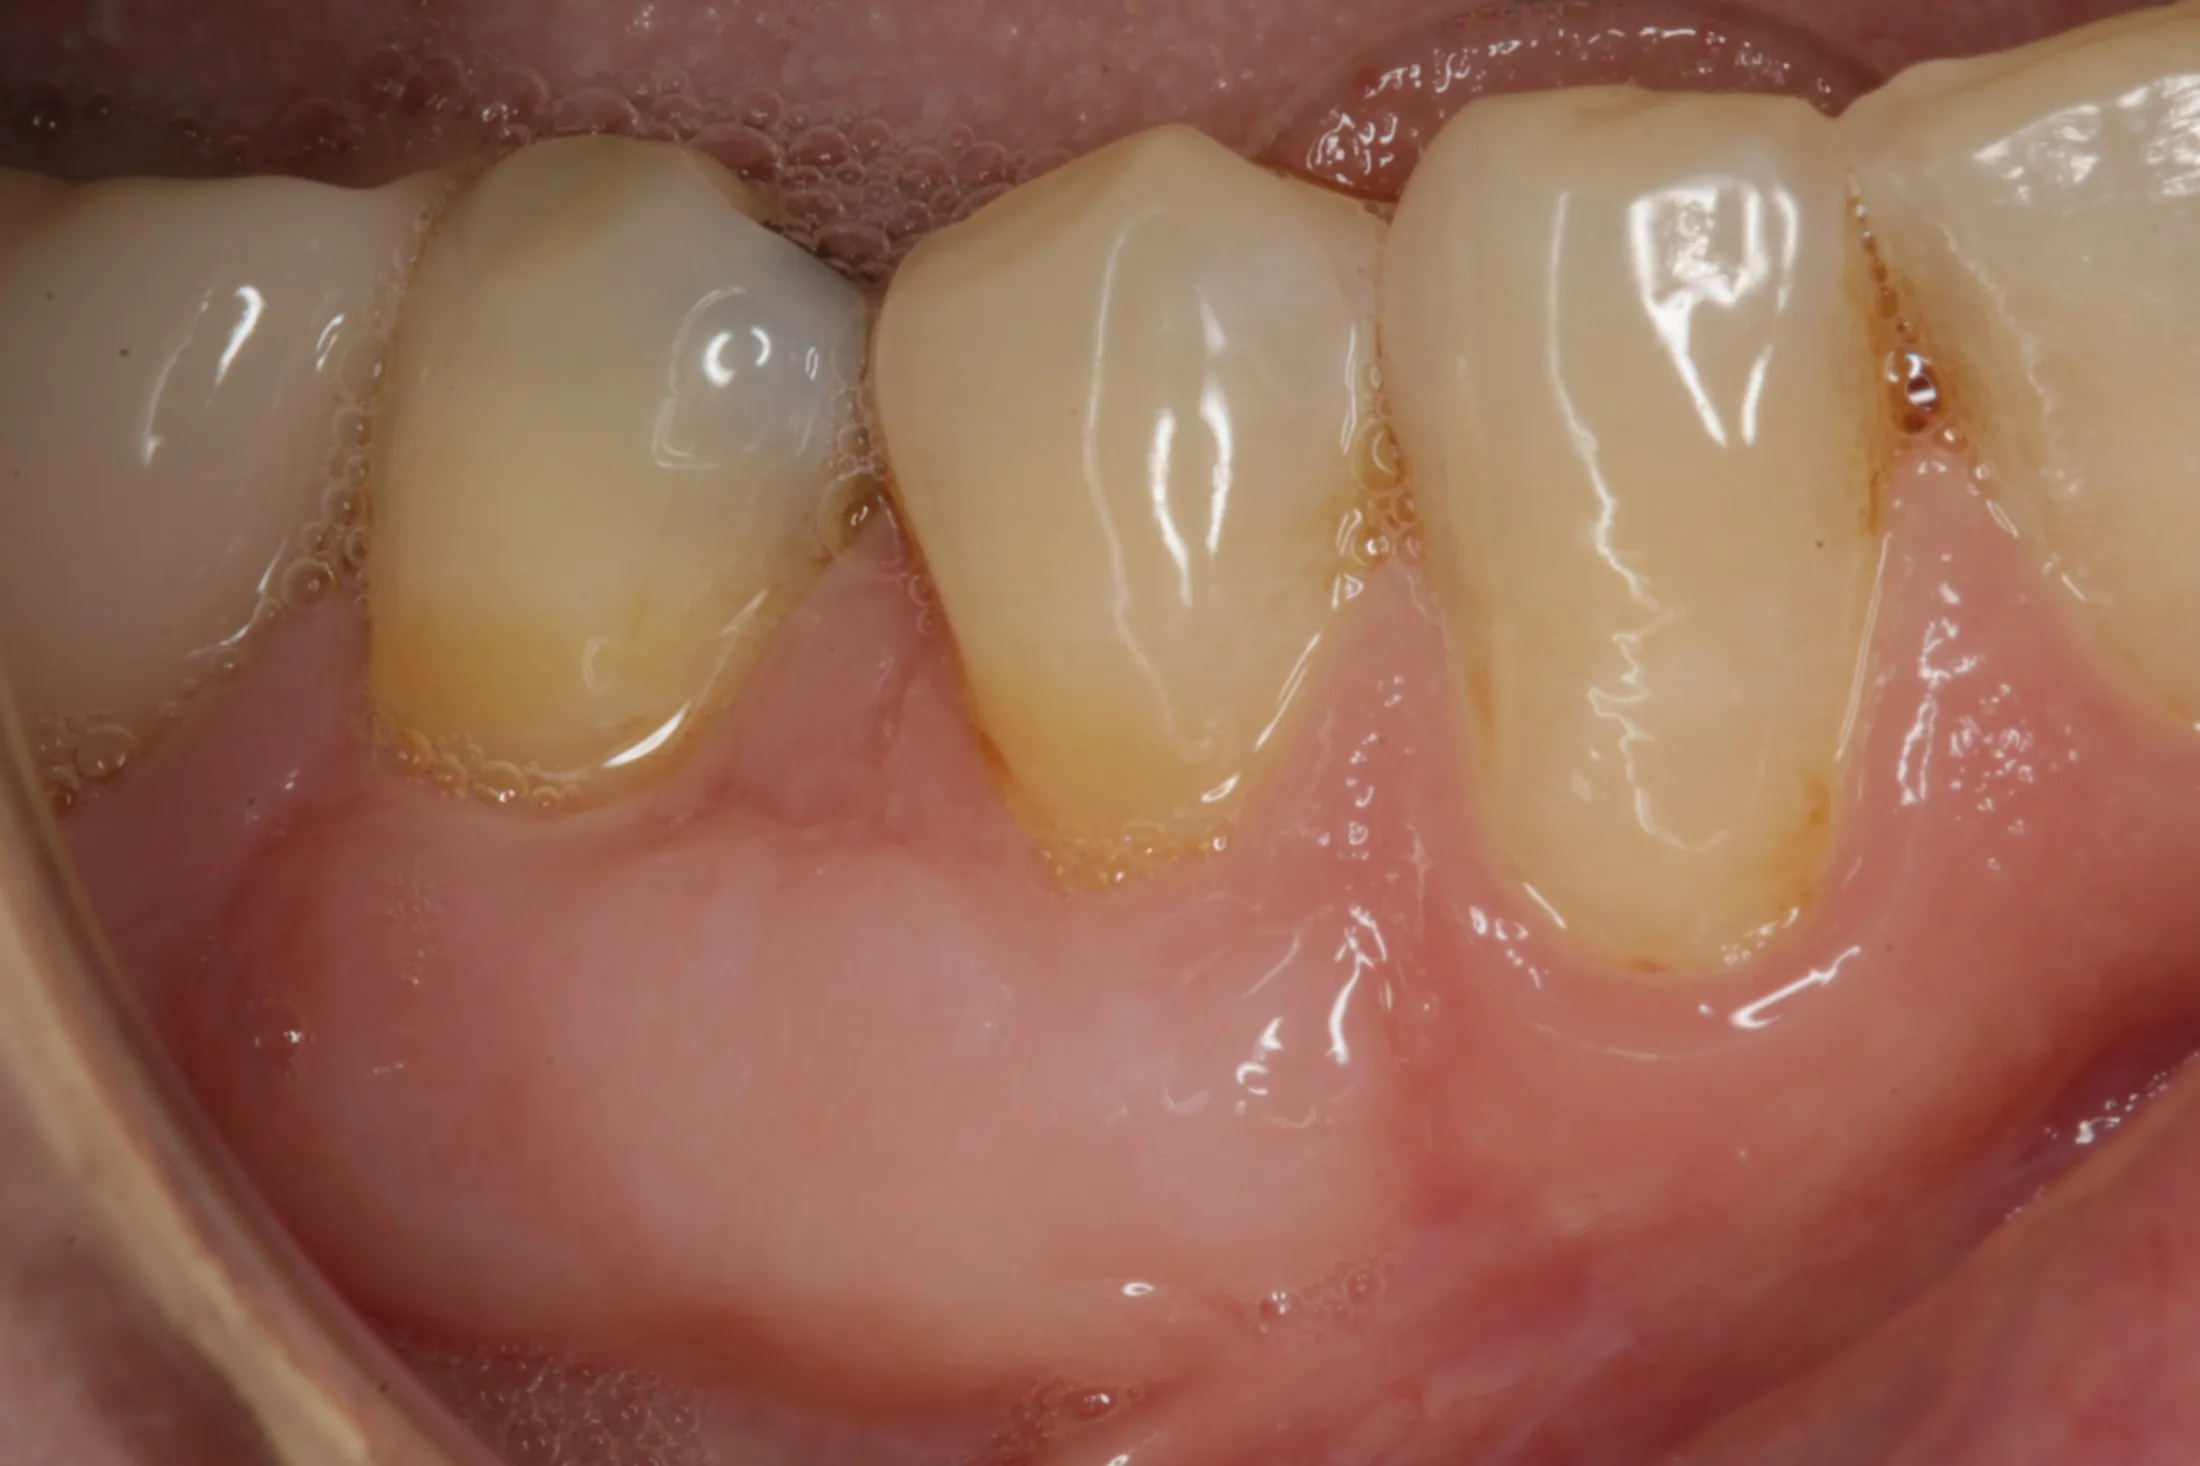 Enhanced appearance and health of gums following grafting procedure."